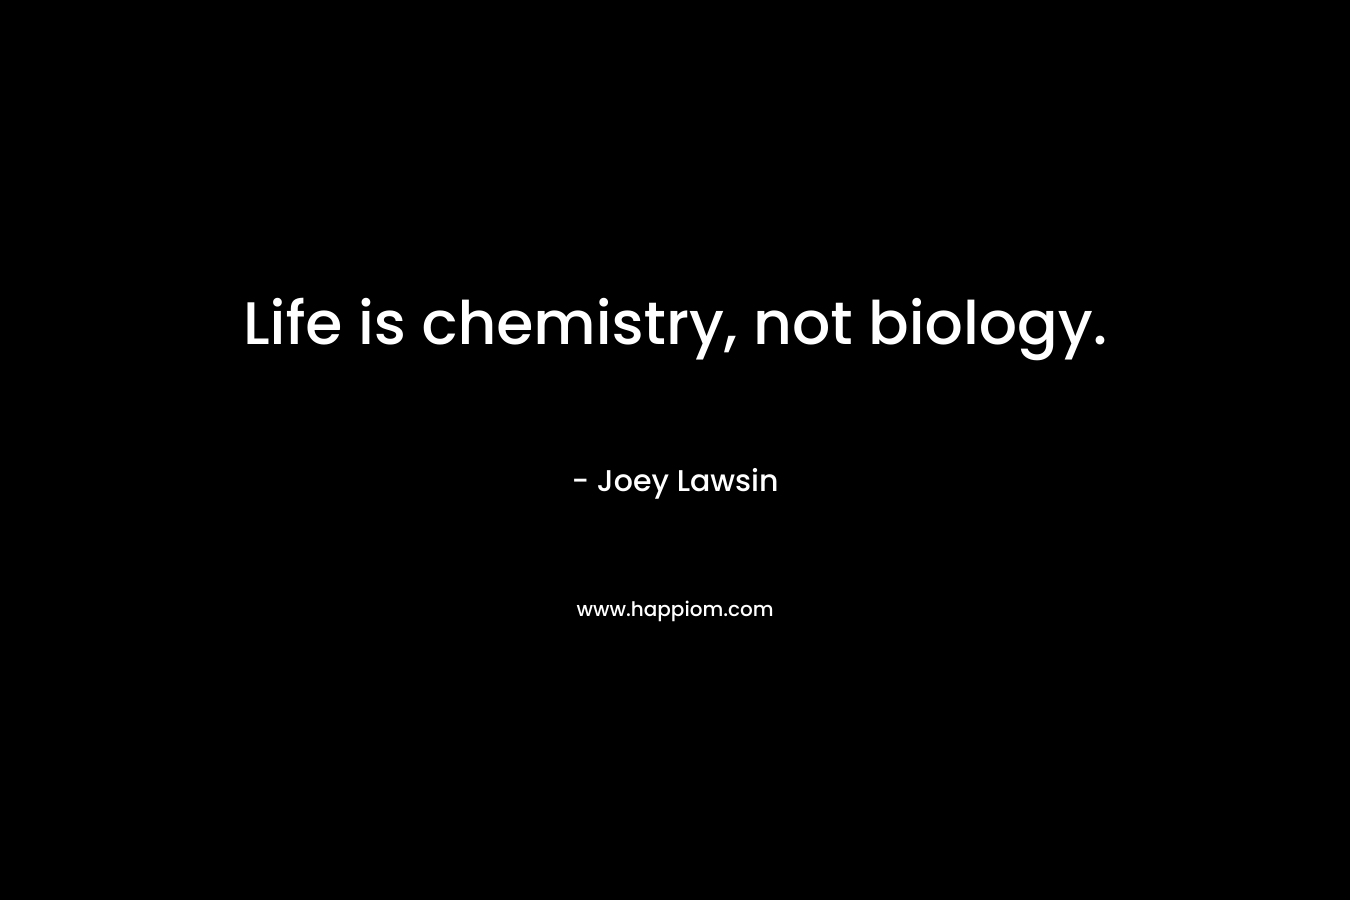 Life is chemistry, not biology.